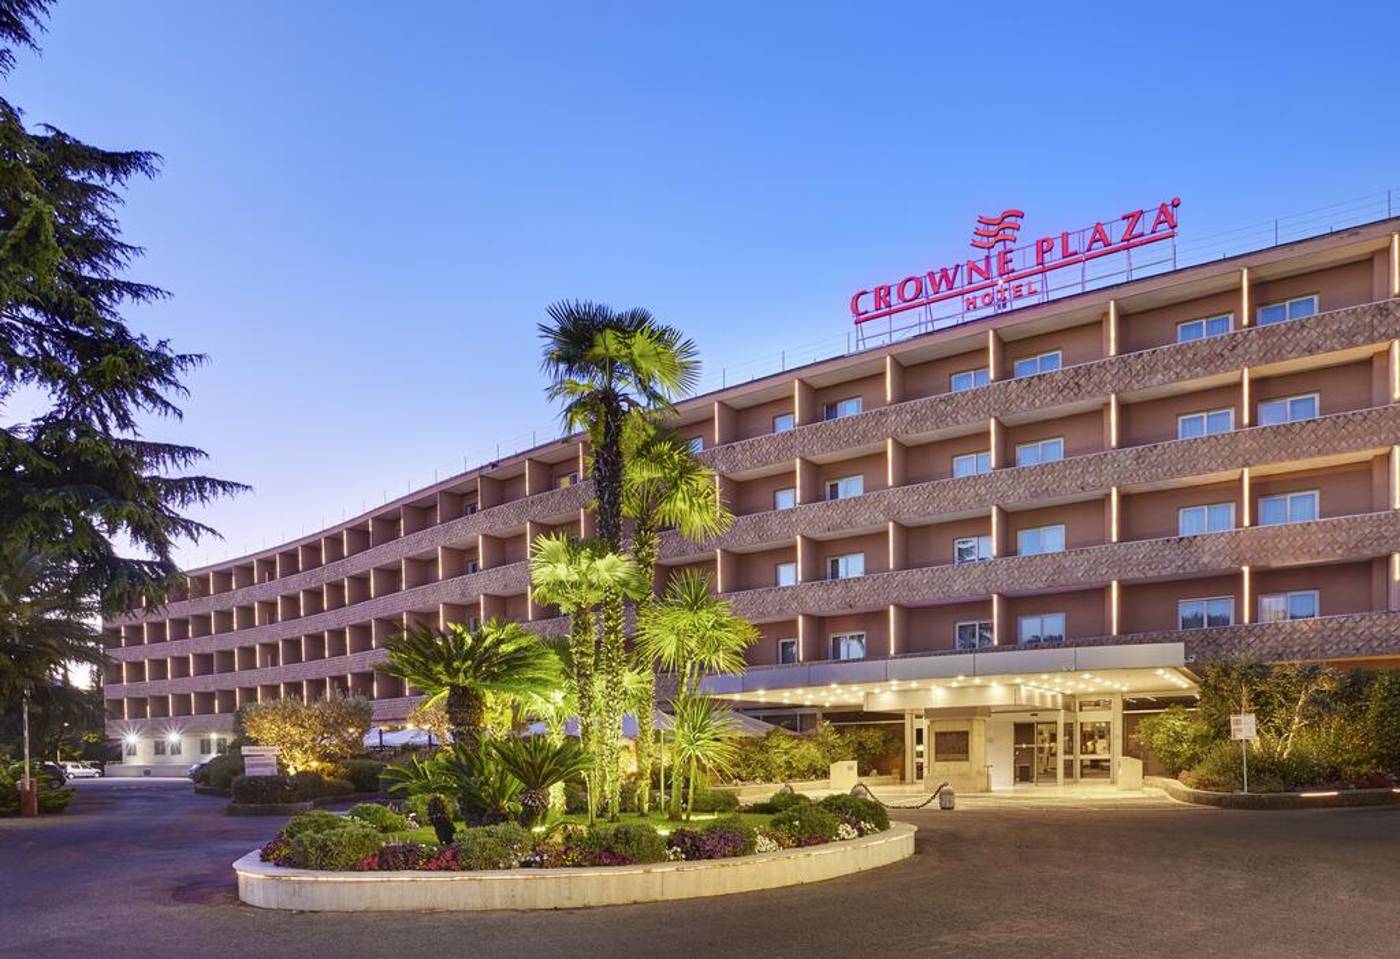 Crowne Plaza St. Petere, Italy